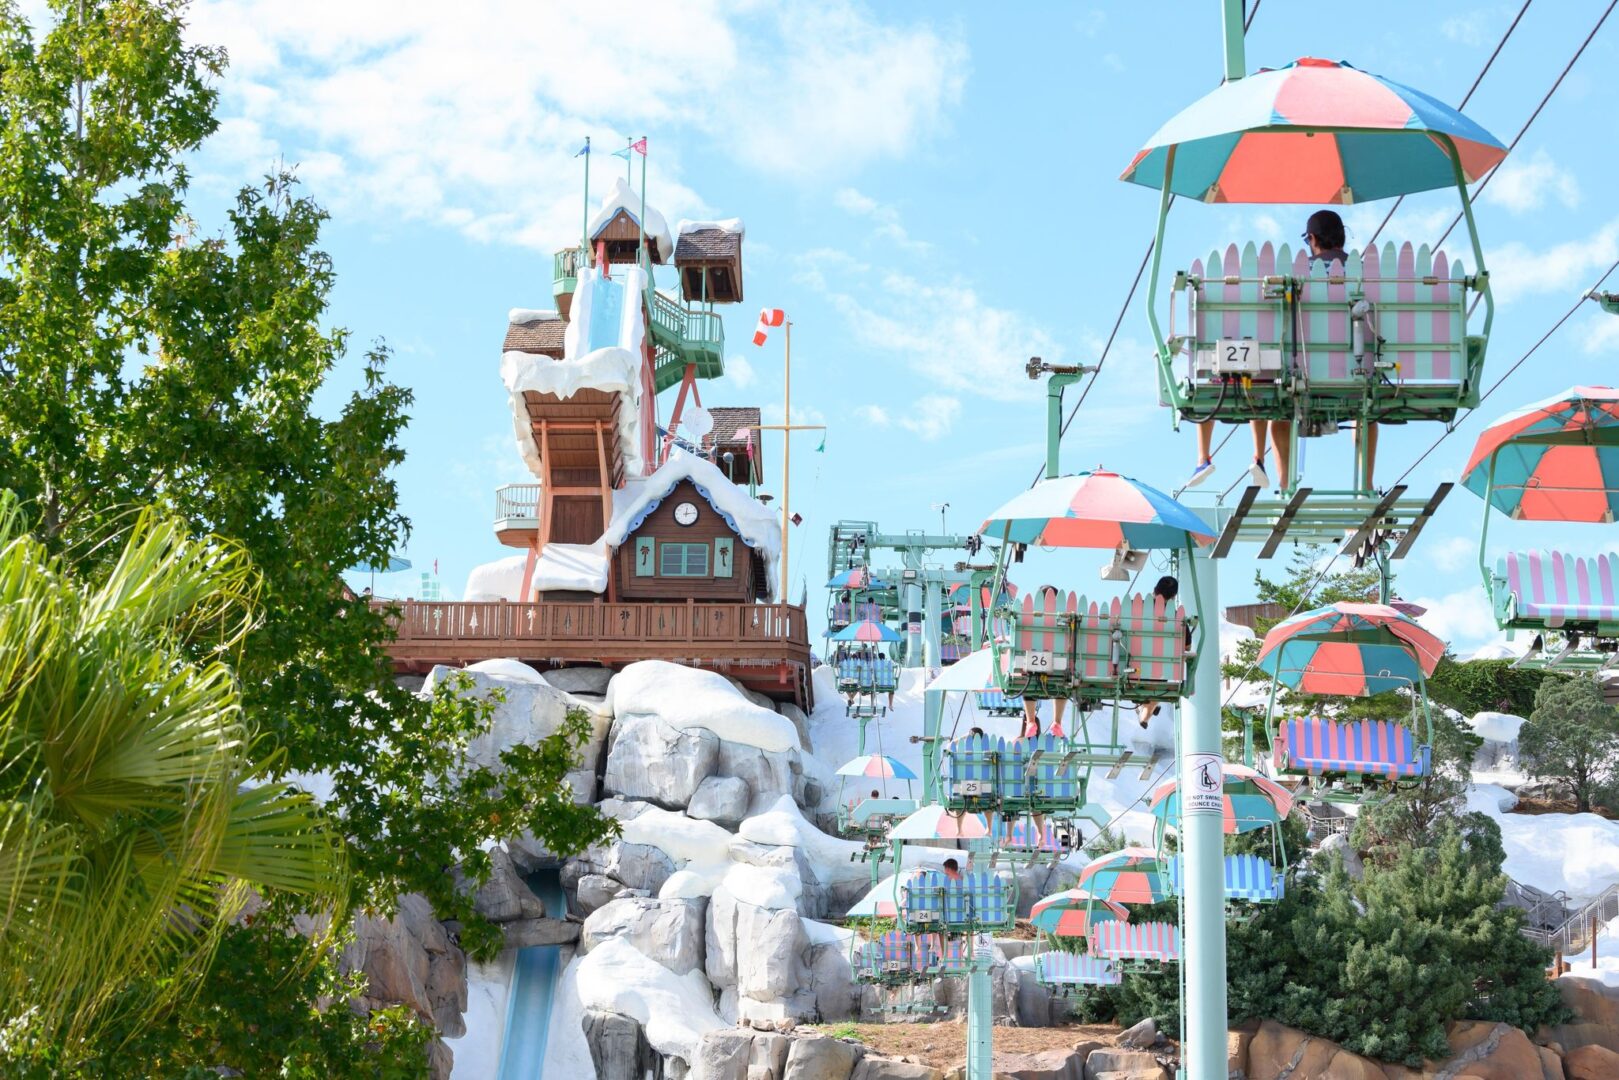 Disney’s Blizzard Beach Water Park To Close for Refurb